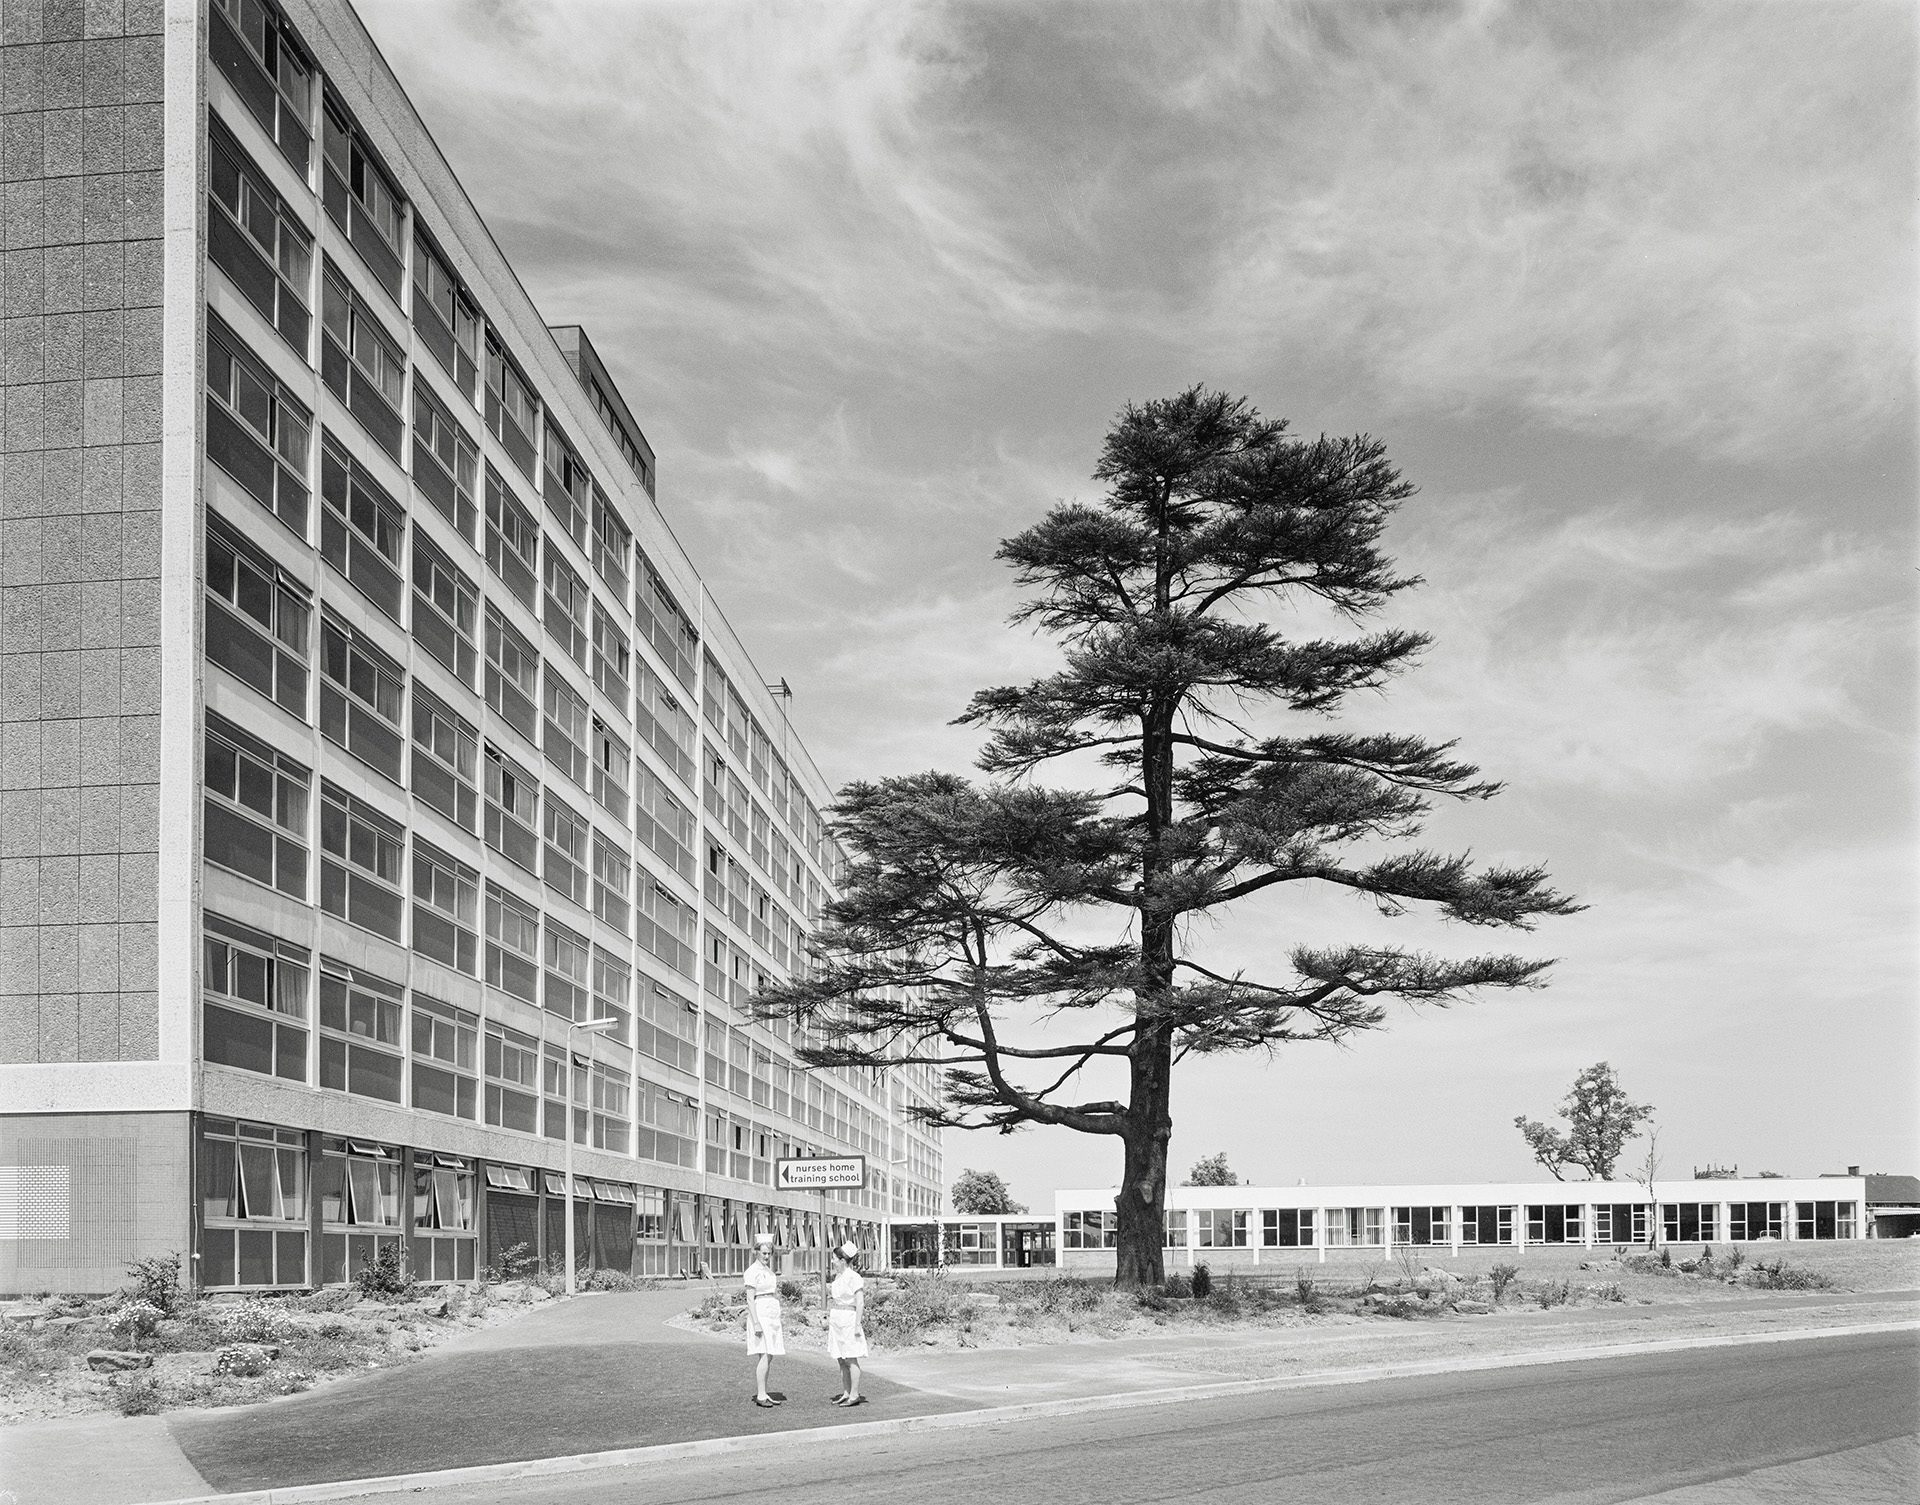 Black and white photograph of a large brutalist hospital building with a tree in front of it